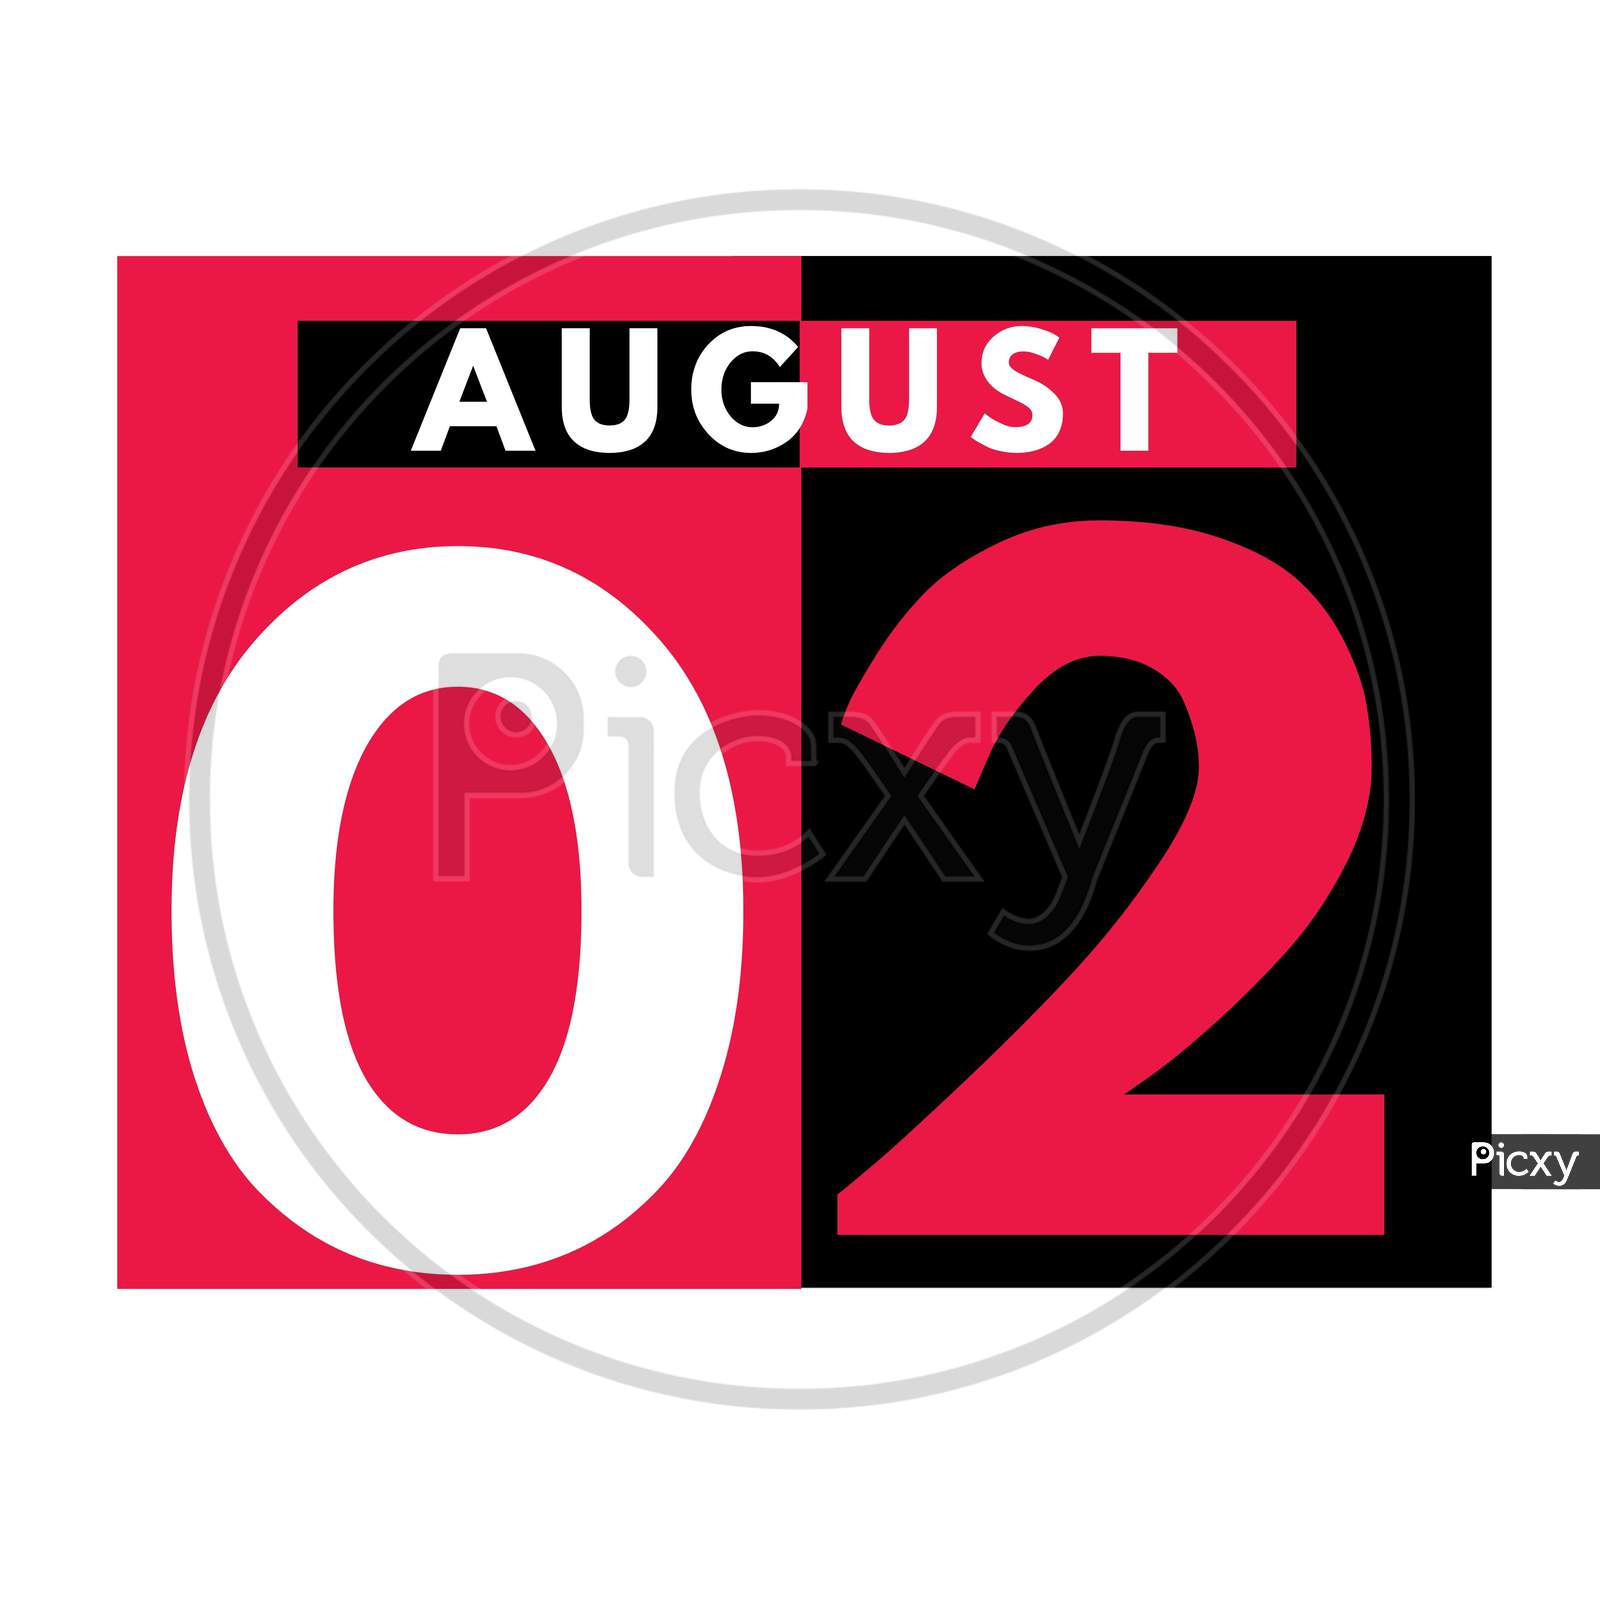 August 2 . Modern Daily Calendar Icon .Date ,Day, Month .Calendar For The Month Of August